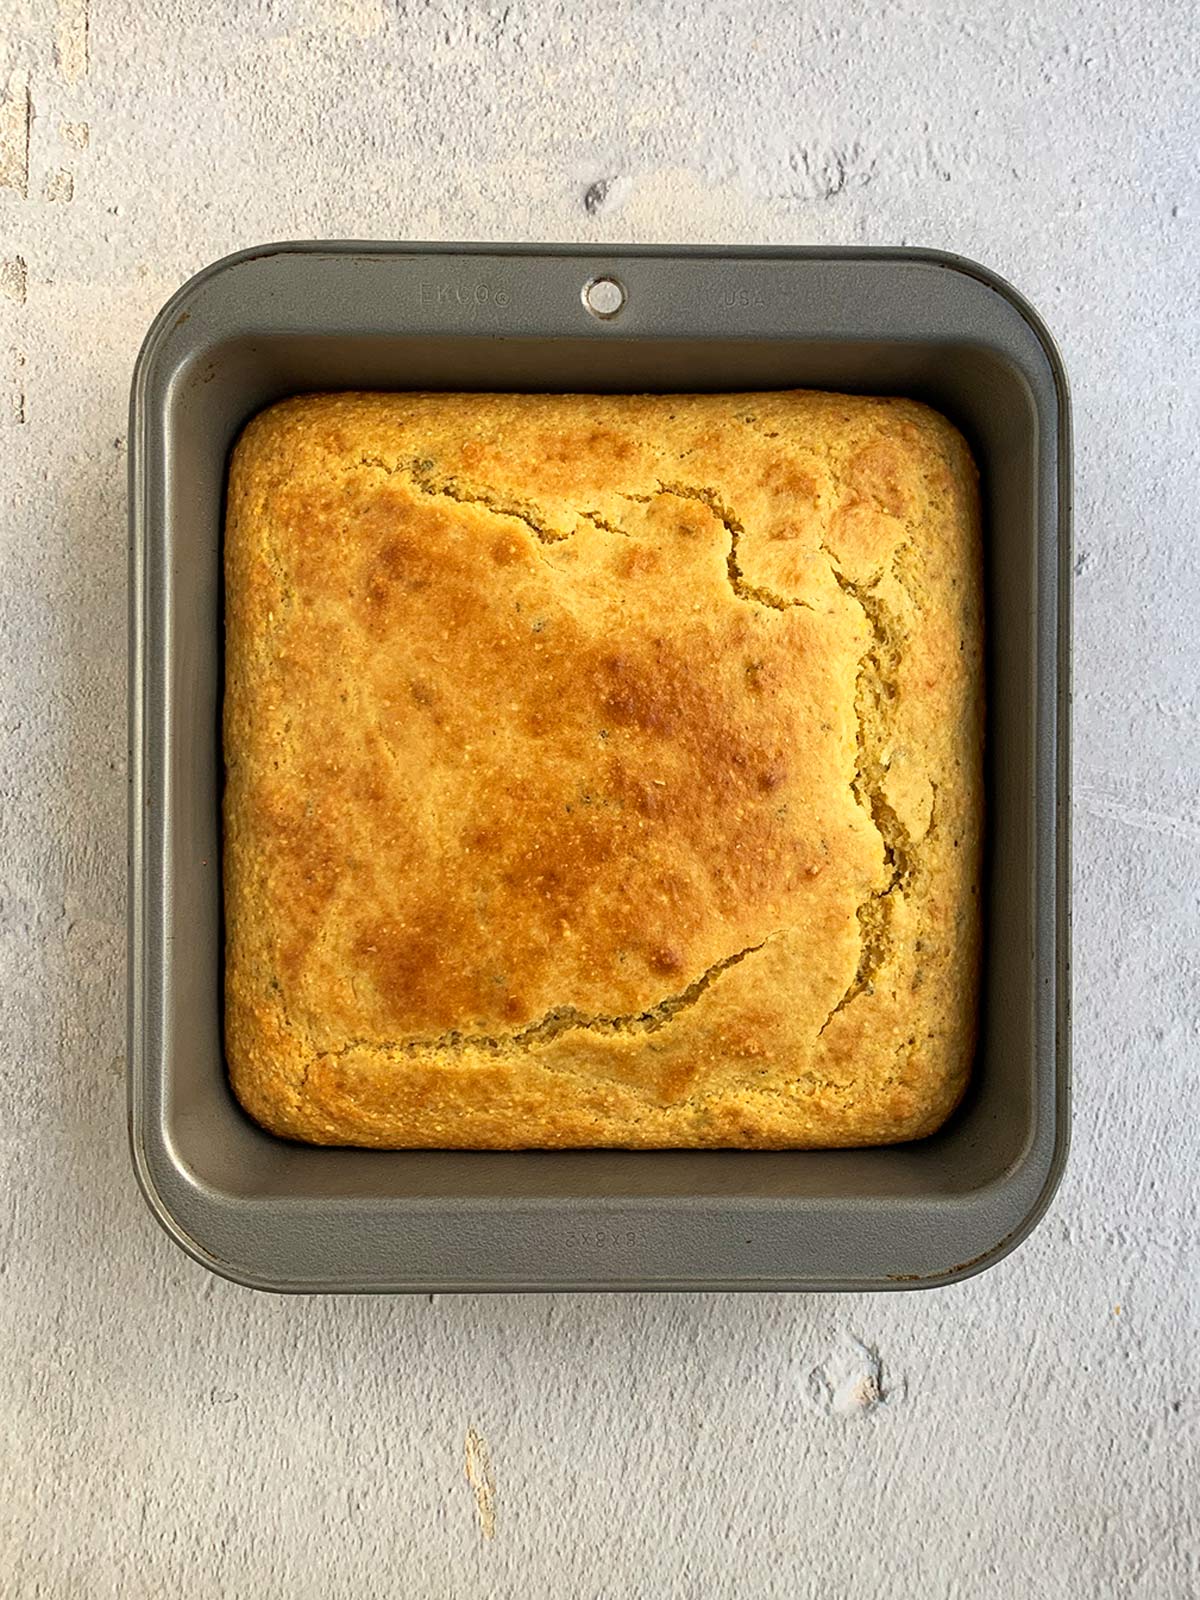 Baked cornbread in grey pan ready to eat.